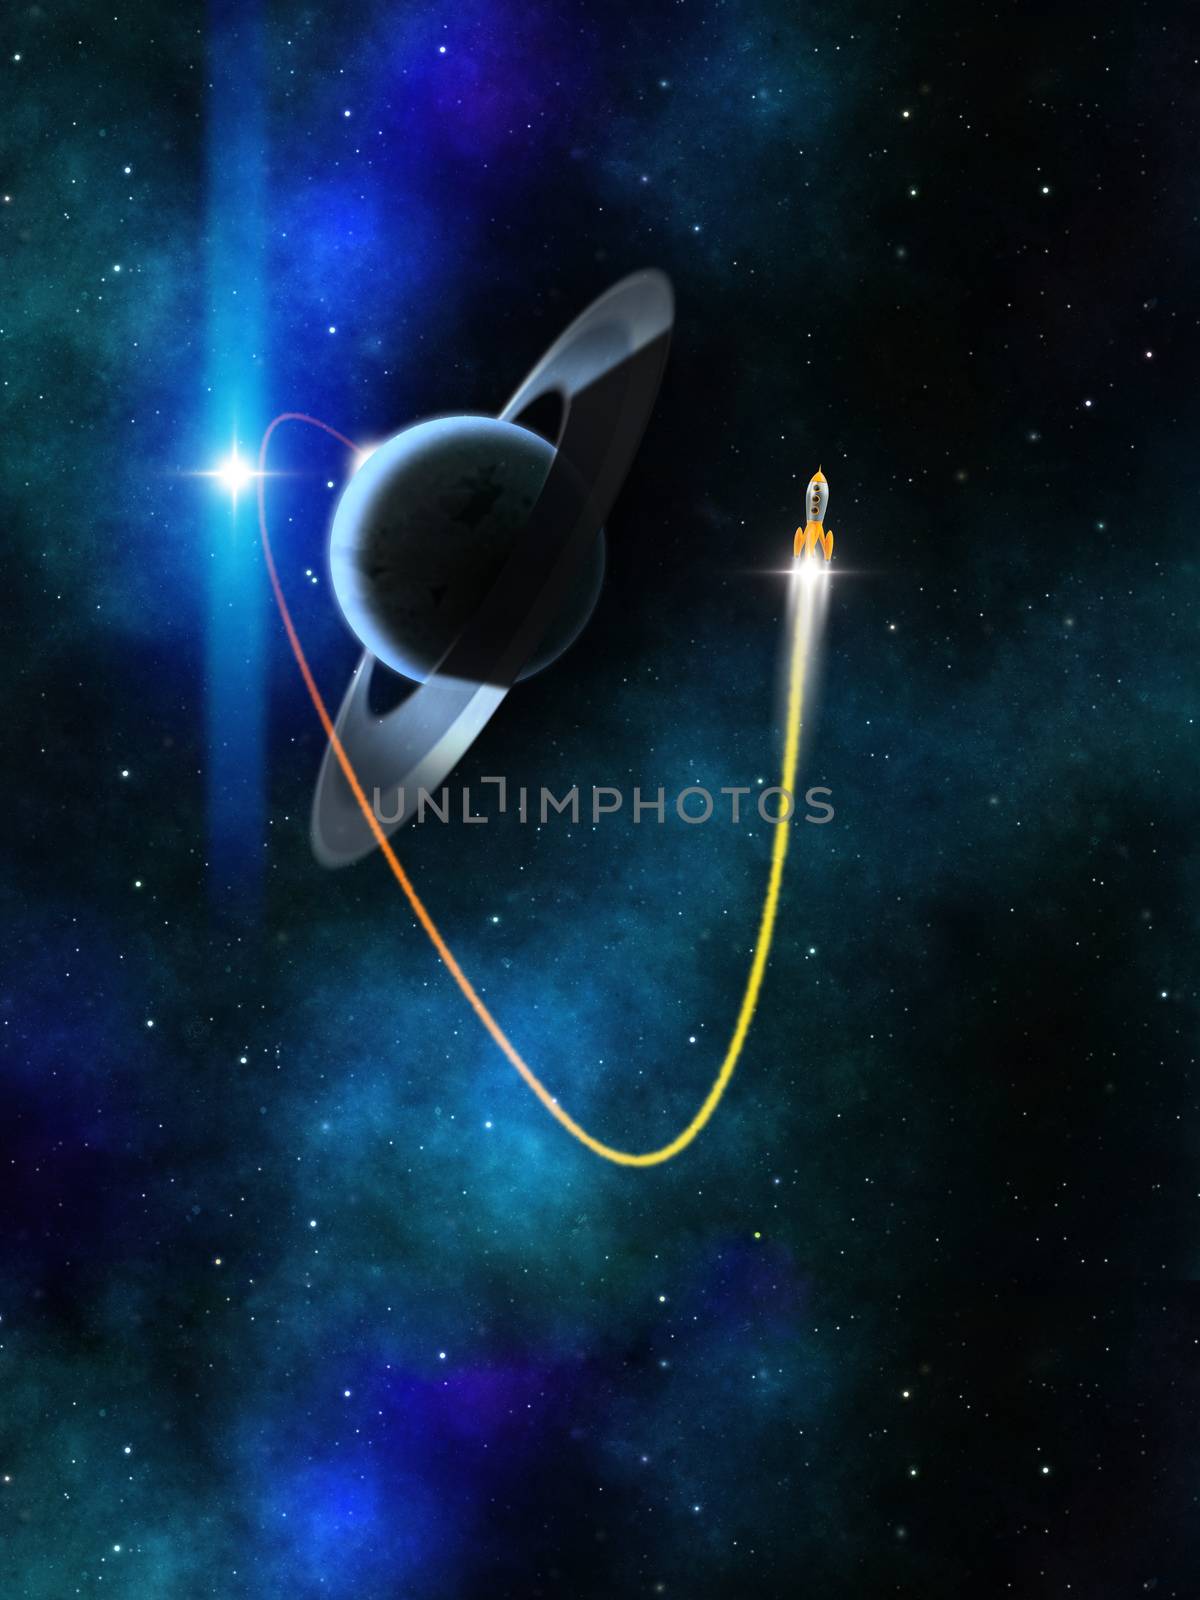 An illustration of a blue planet rocket launch